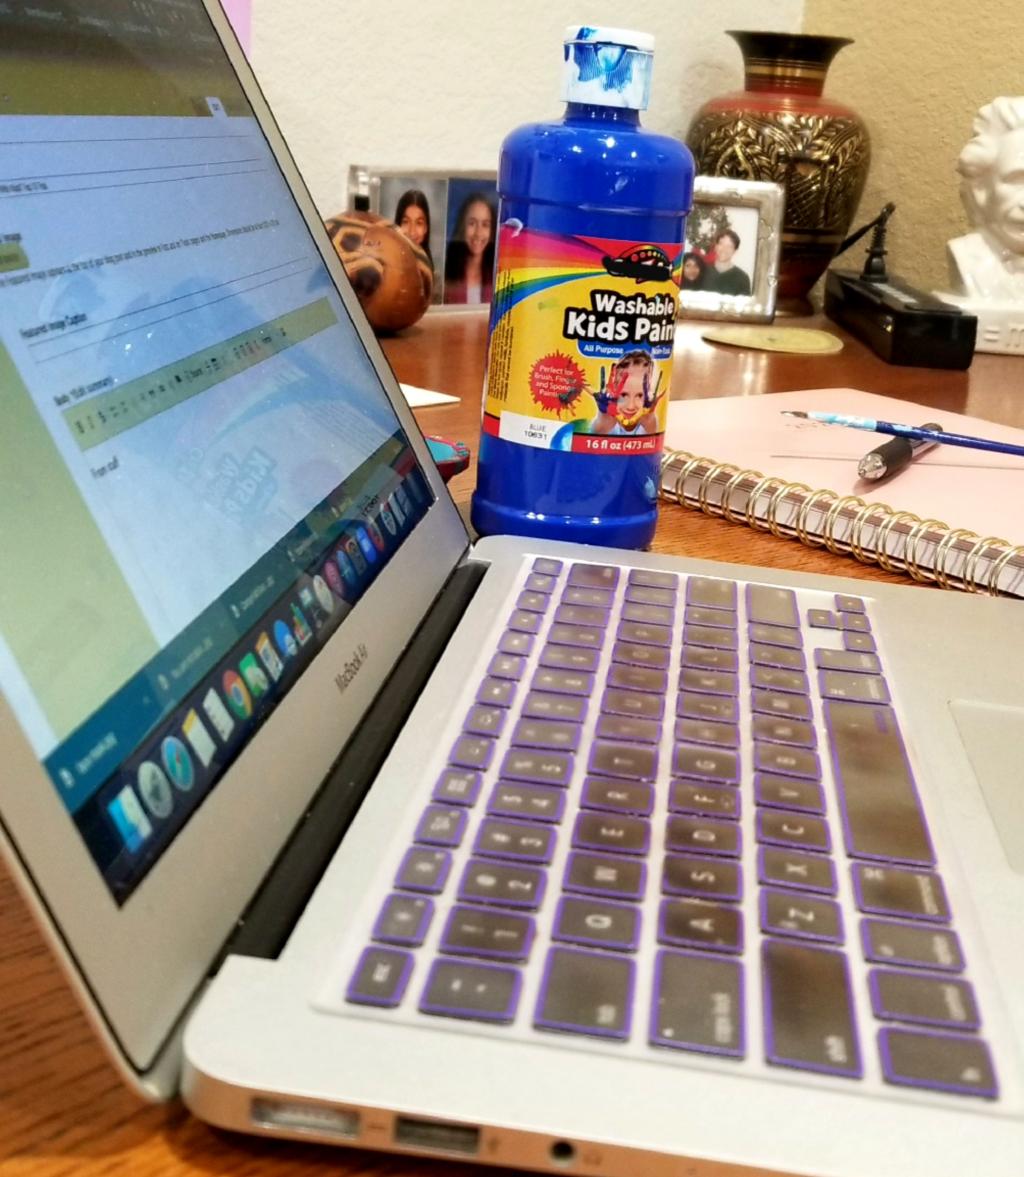 [IMAGE DESCRIPTION: A photo of a laptop with a bottle of kids' paint, a paintbrush, a planner, and a pen in the background.]